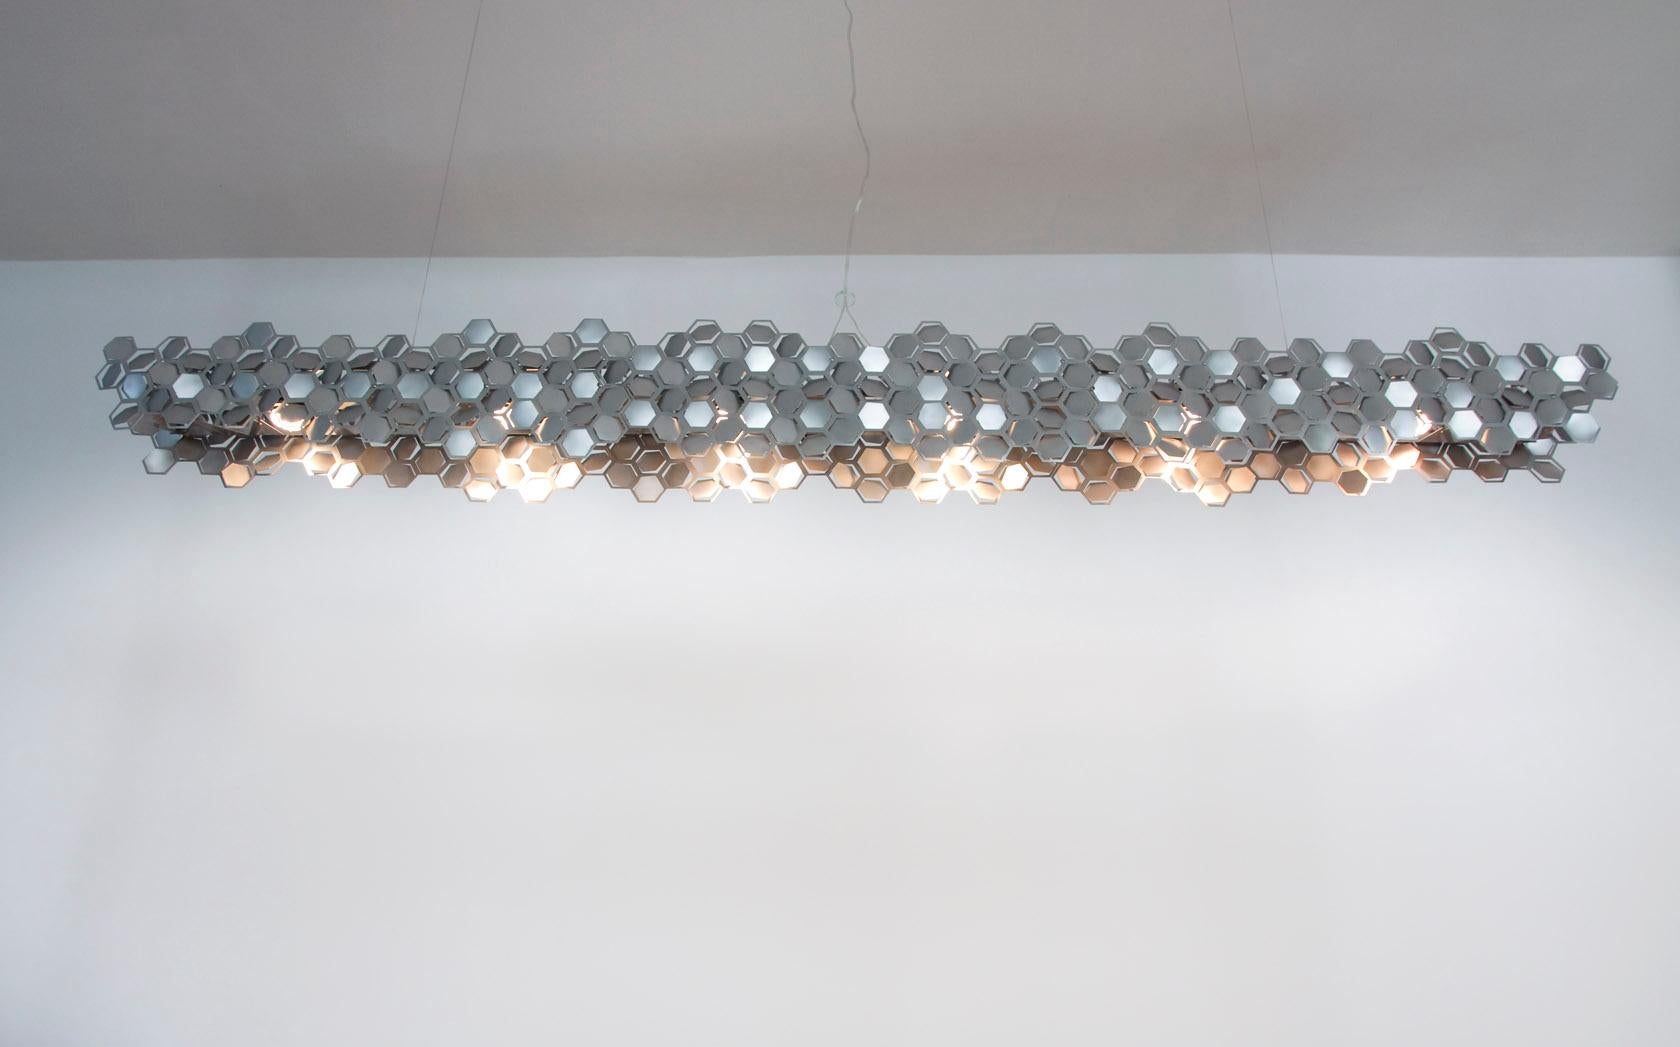 Beeline 70” Linear Chandelier in Stainless Steel by David D’Imperio In New Condition For Sale In Deland, FL